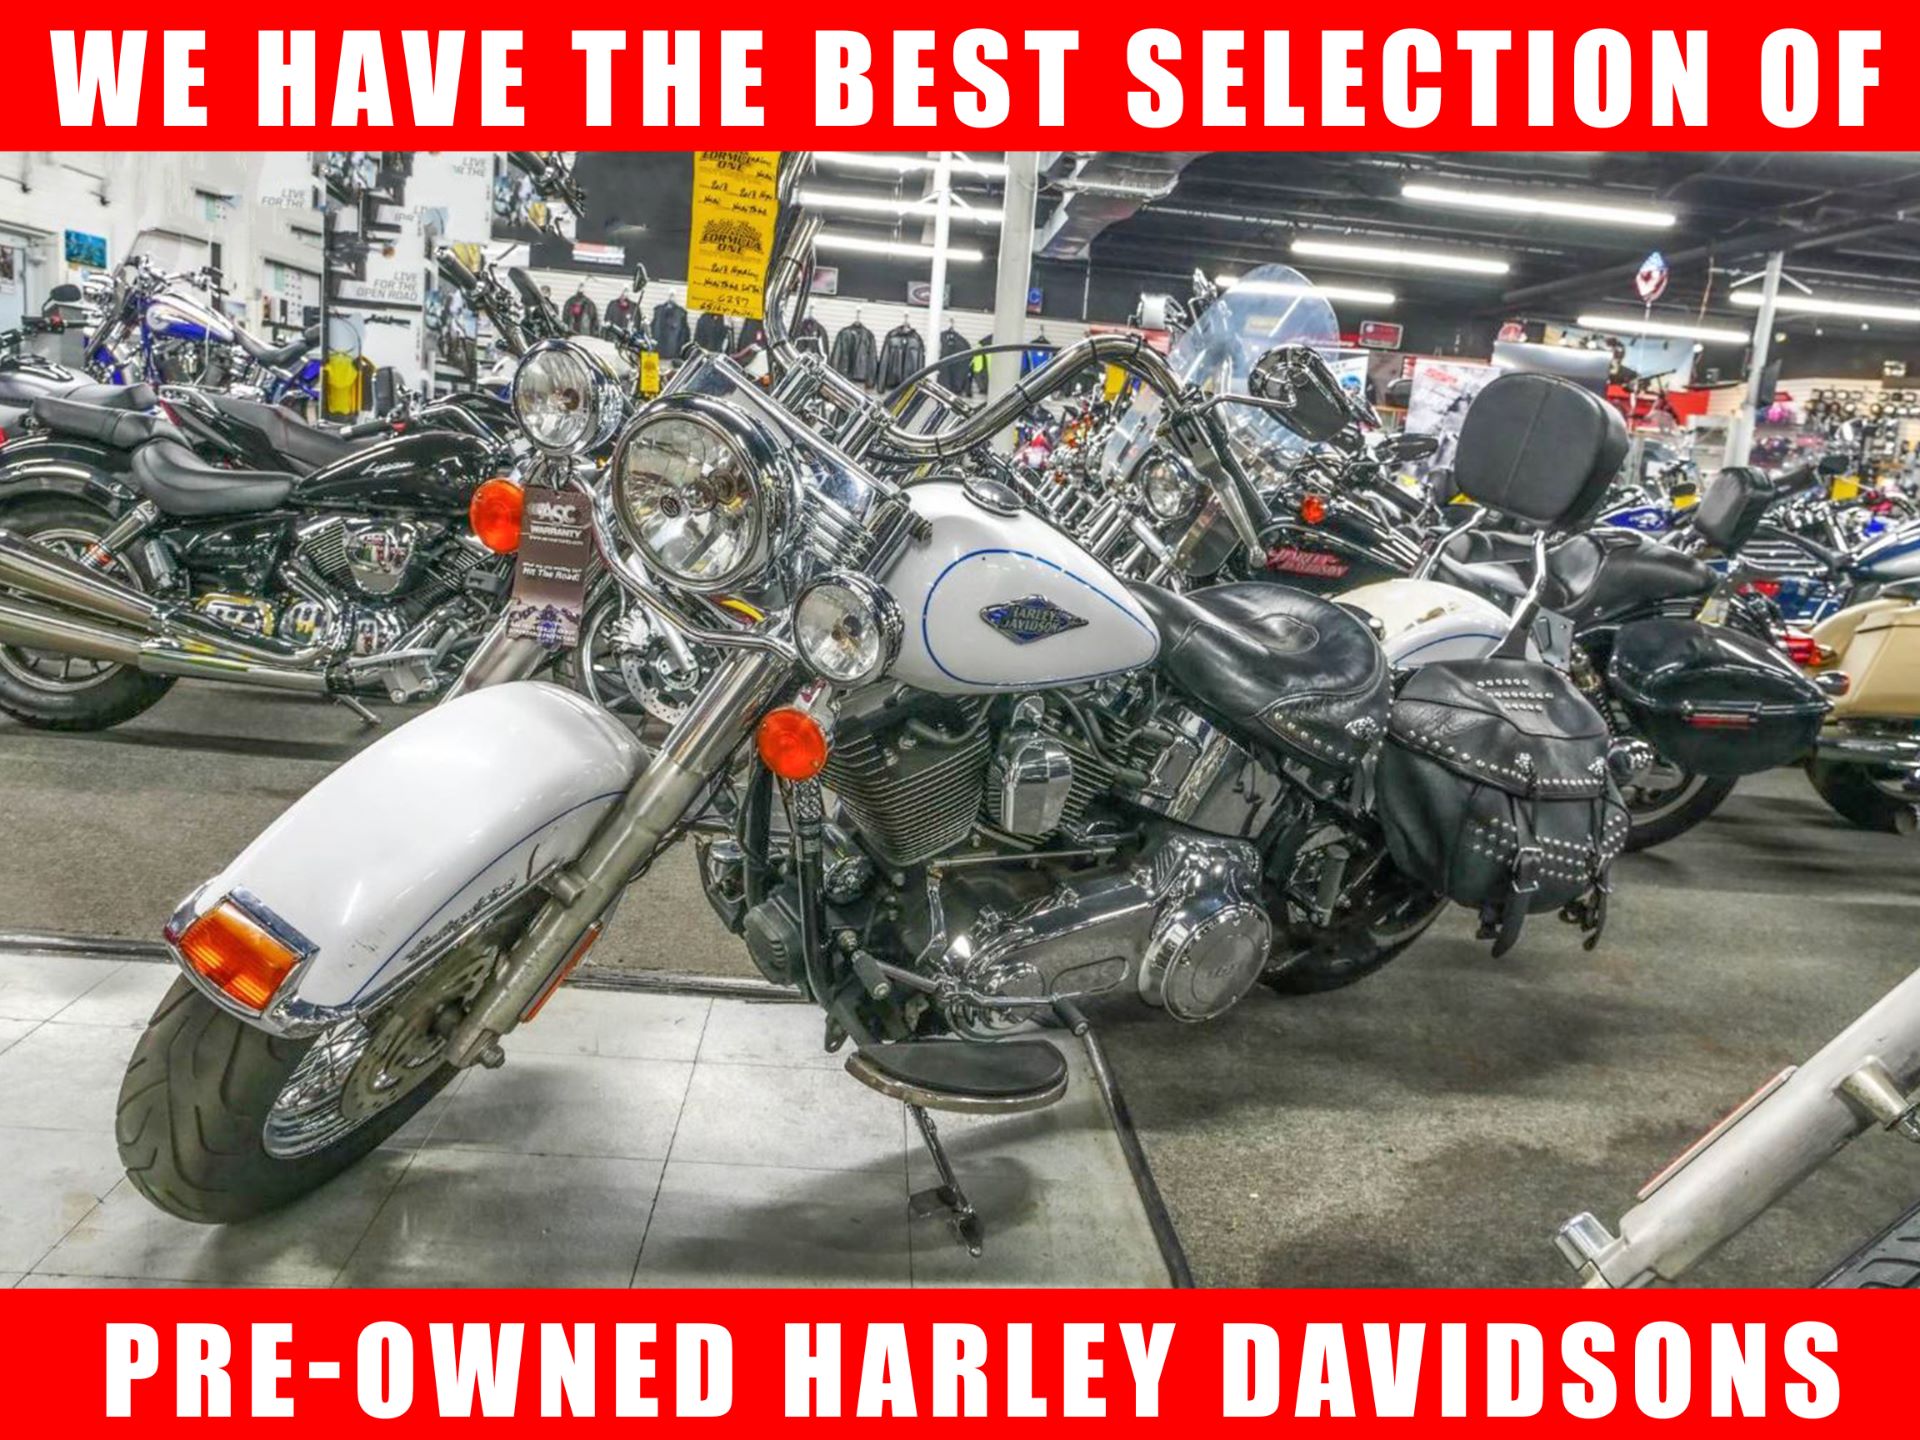 Used 2013 Harley Davidson Heritage Softail Classic Motorcycles In Oakdale Ny Stock Number Um Db026287